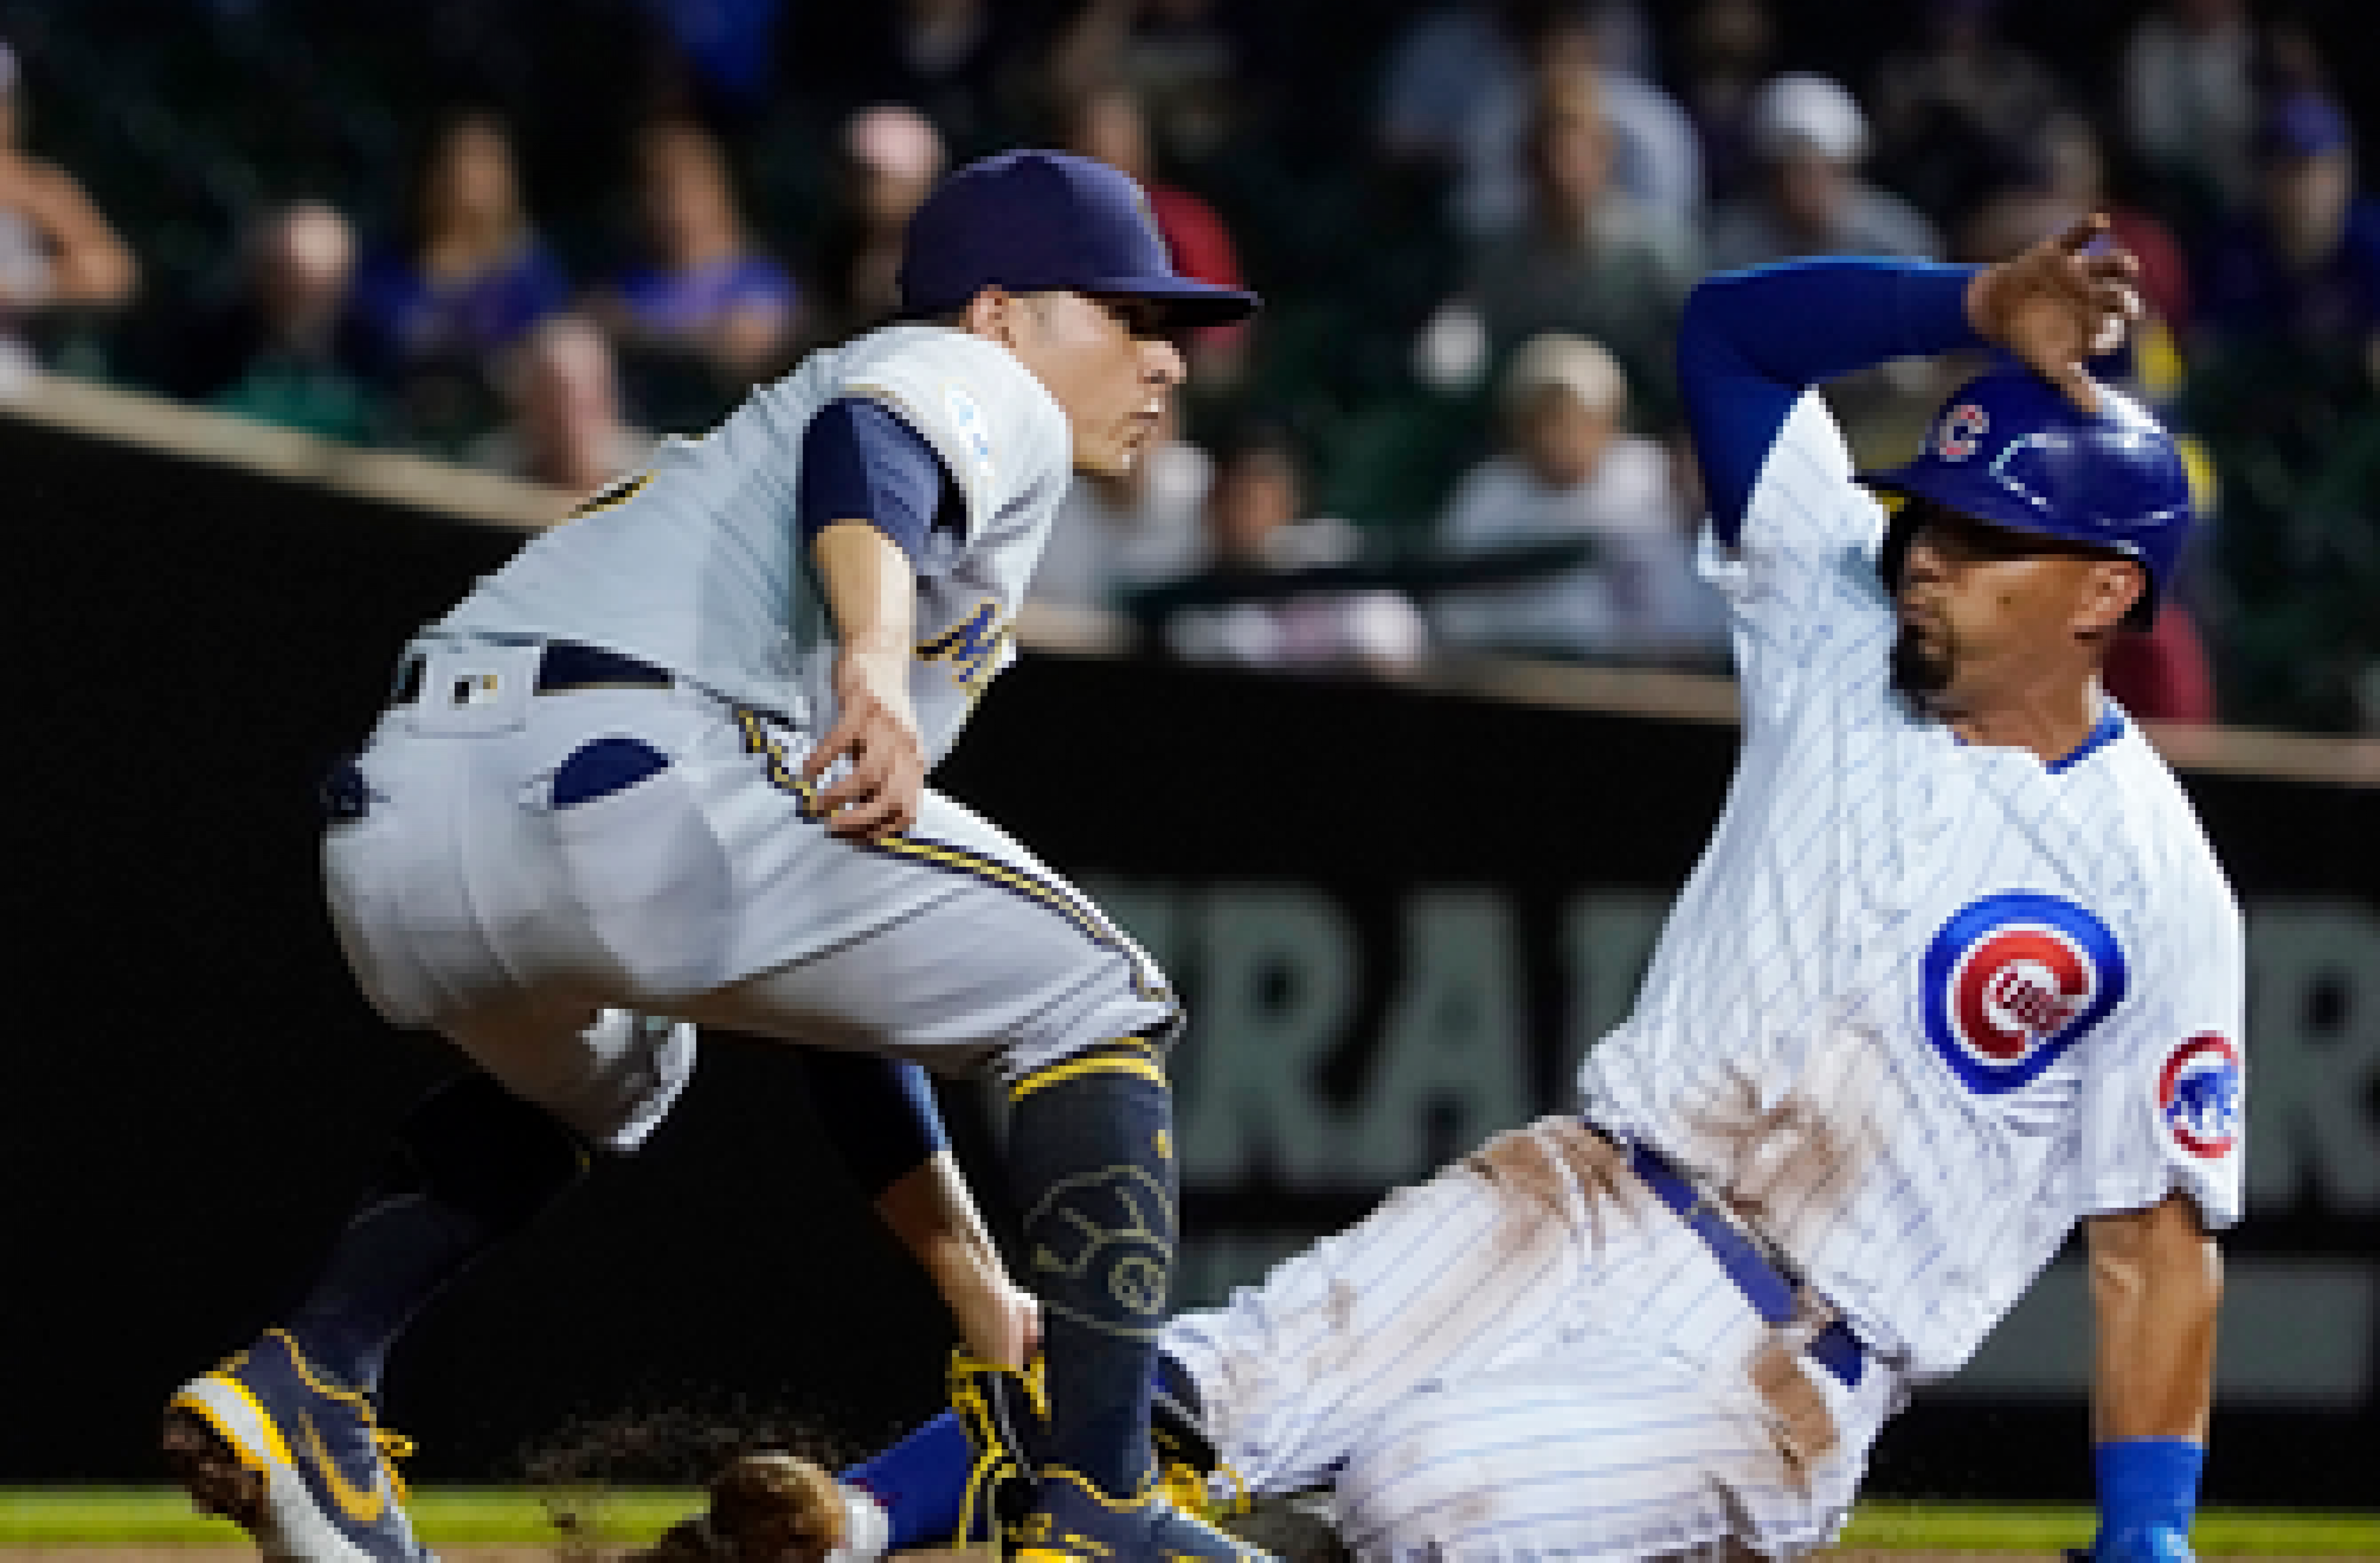 Brewers take big lead early and hold on for 6-3 win vs. Cubs